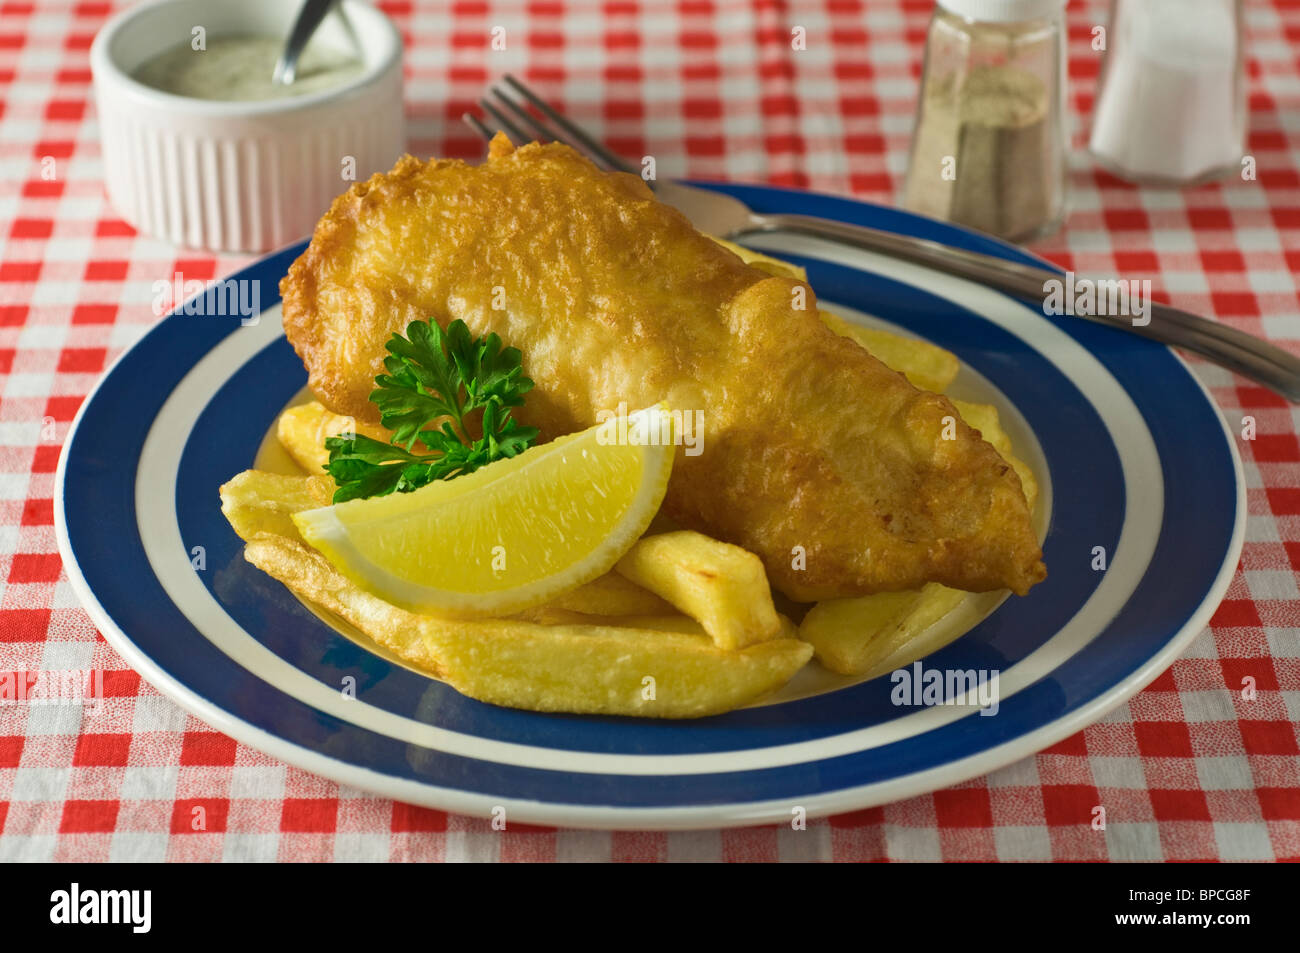 Fish and chips alimentaires traditionnelles UK Banque D'Images